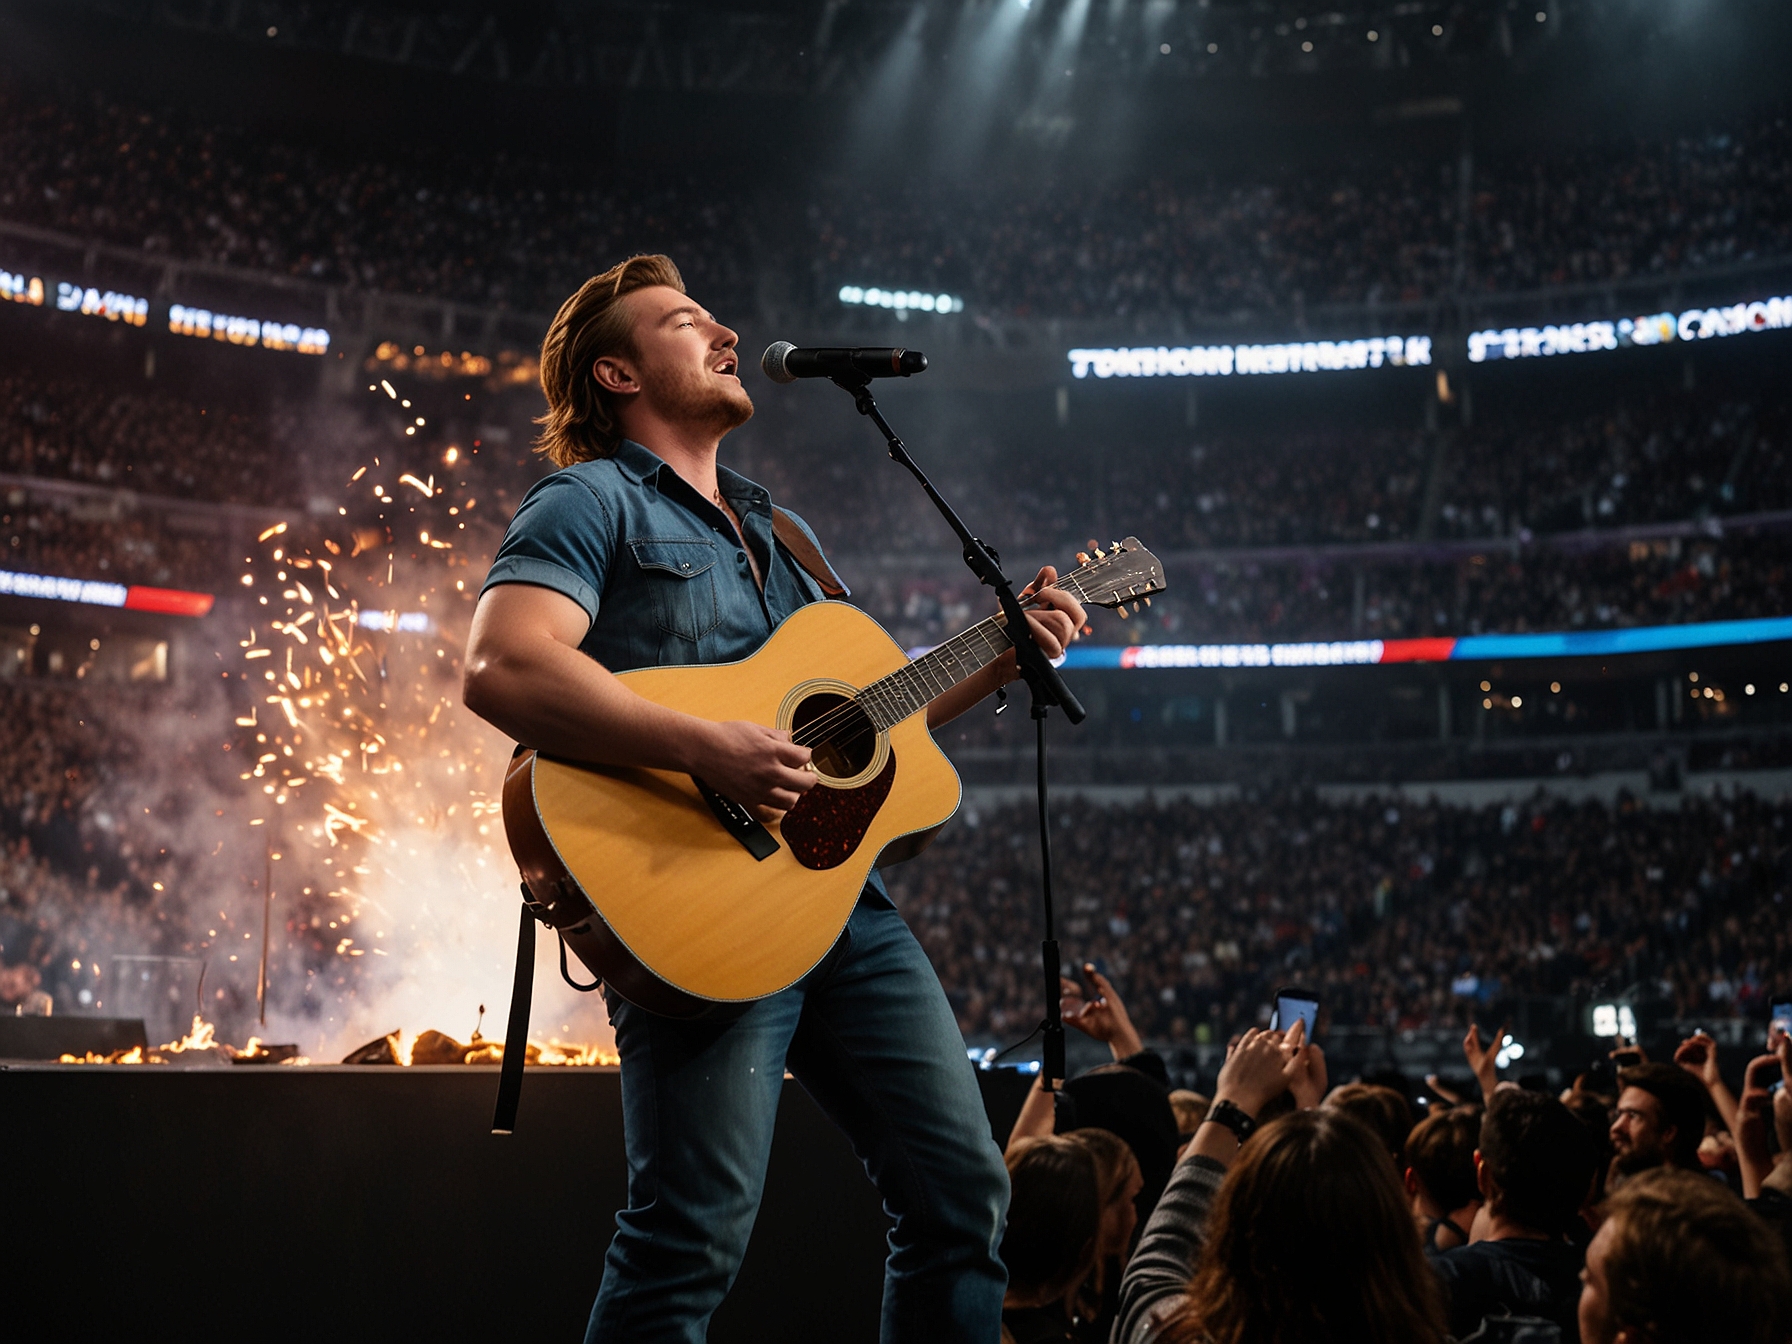 Morgan Wallen captivates the audience at U.S. Bank Stadium, performing his hit song 'Sand in My Boots' amidst stunning pyrotechnics and state-of-the-art lighting.